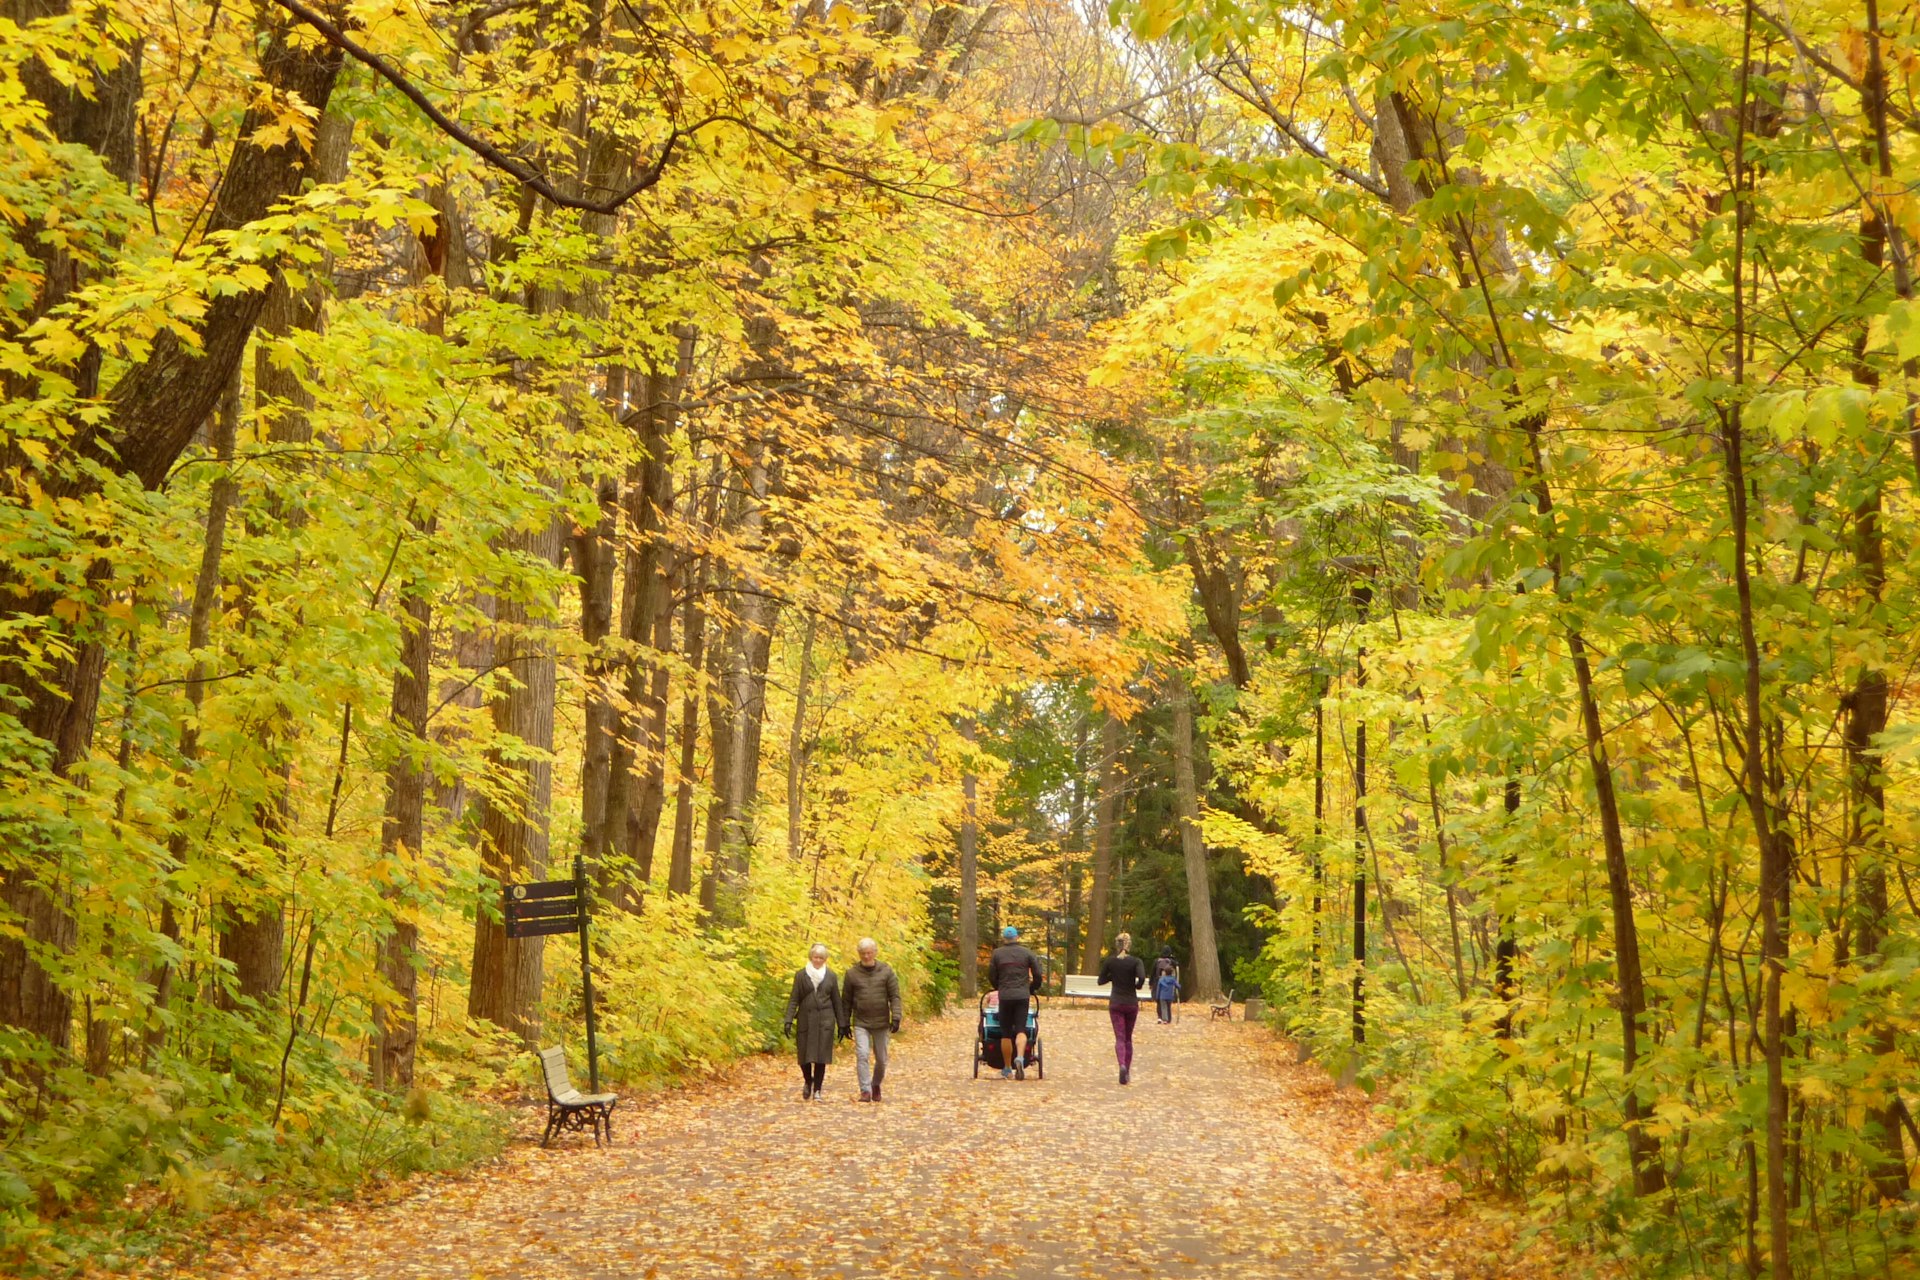 People walking a path lined with trees bearing autumn foliage at Parc du Bois-de-Coulonge  